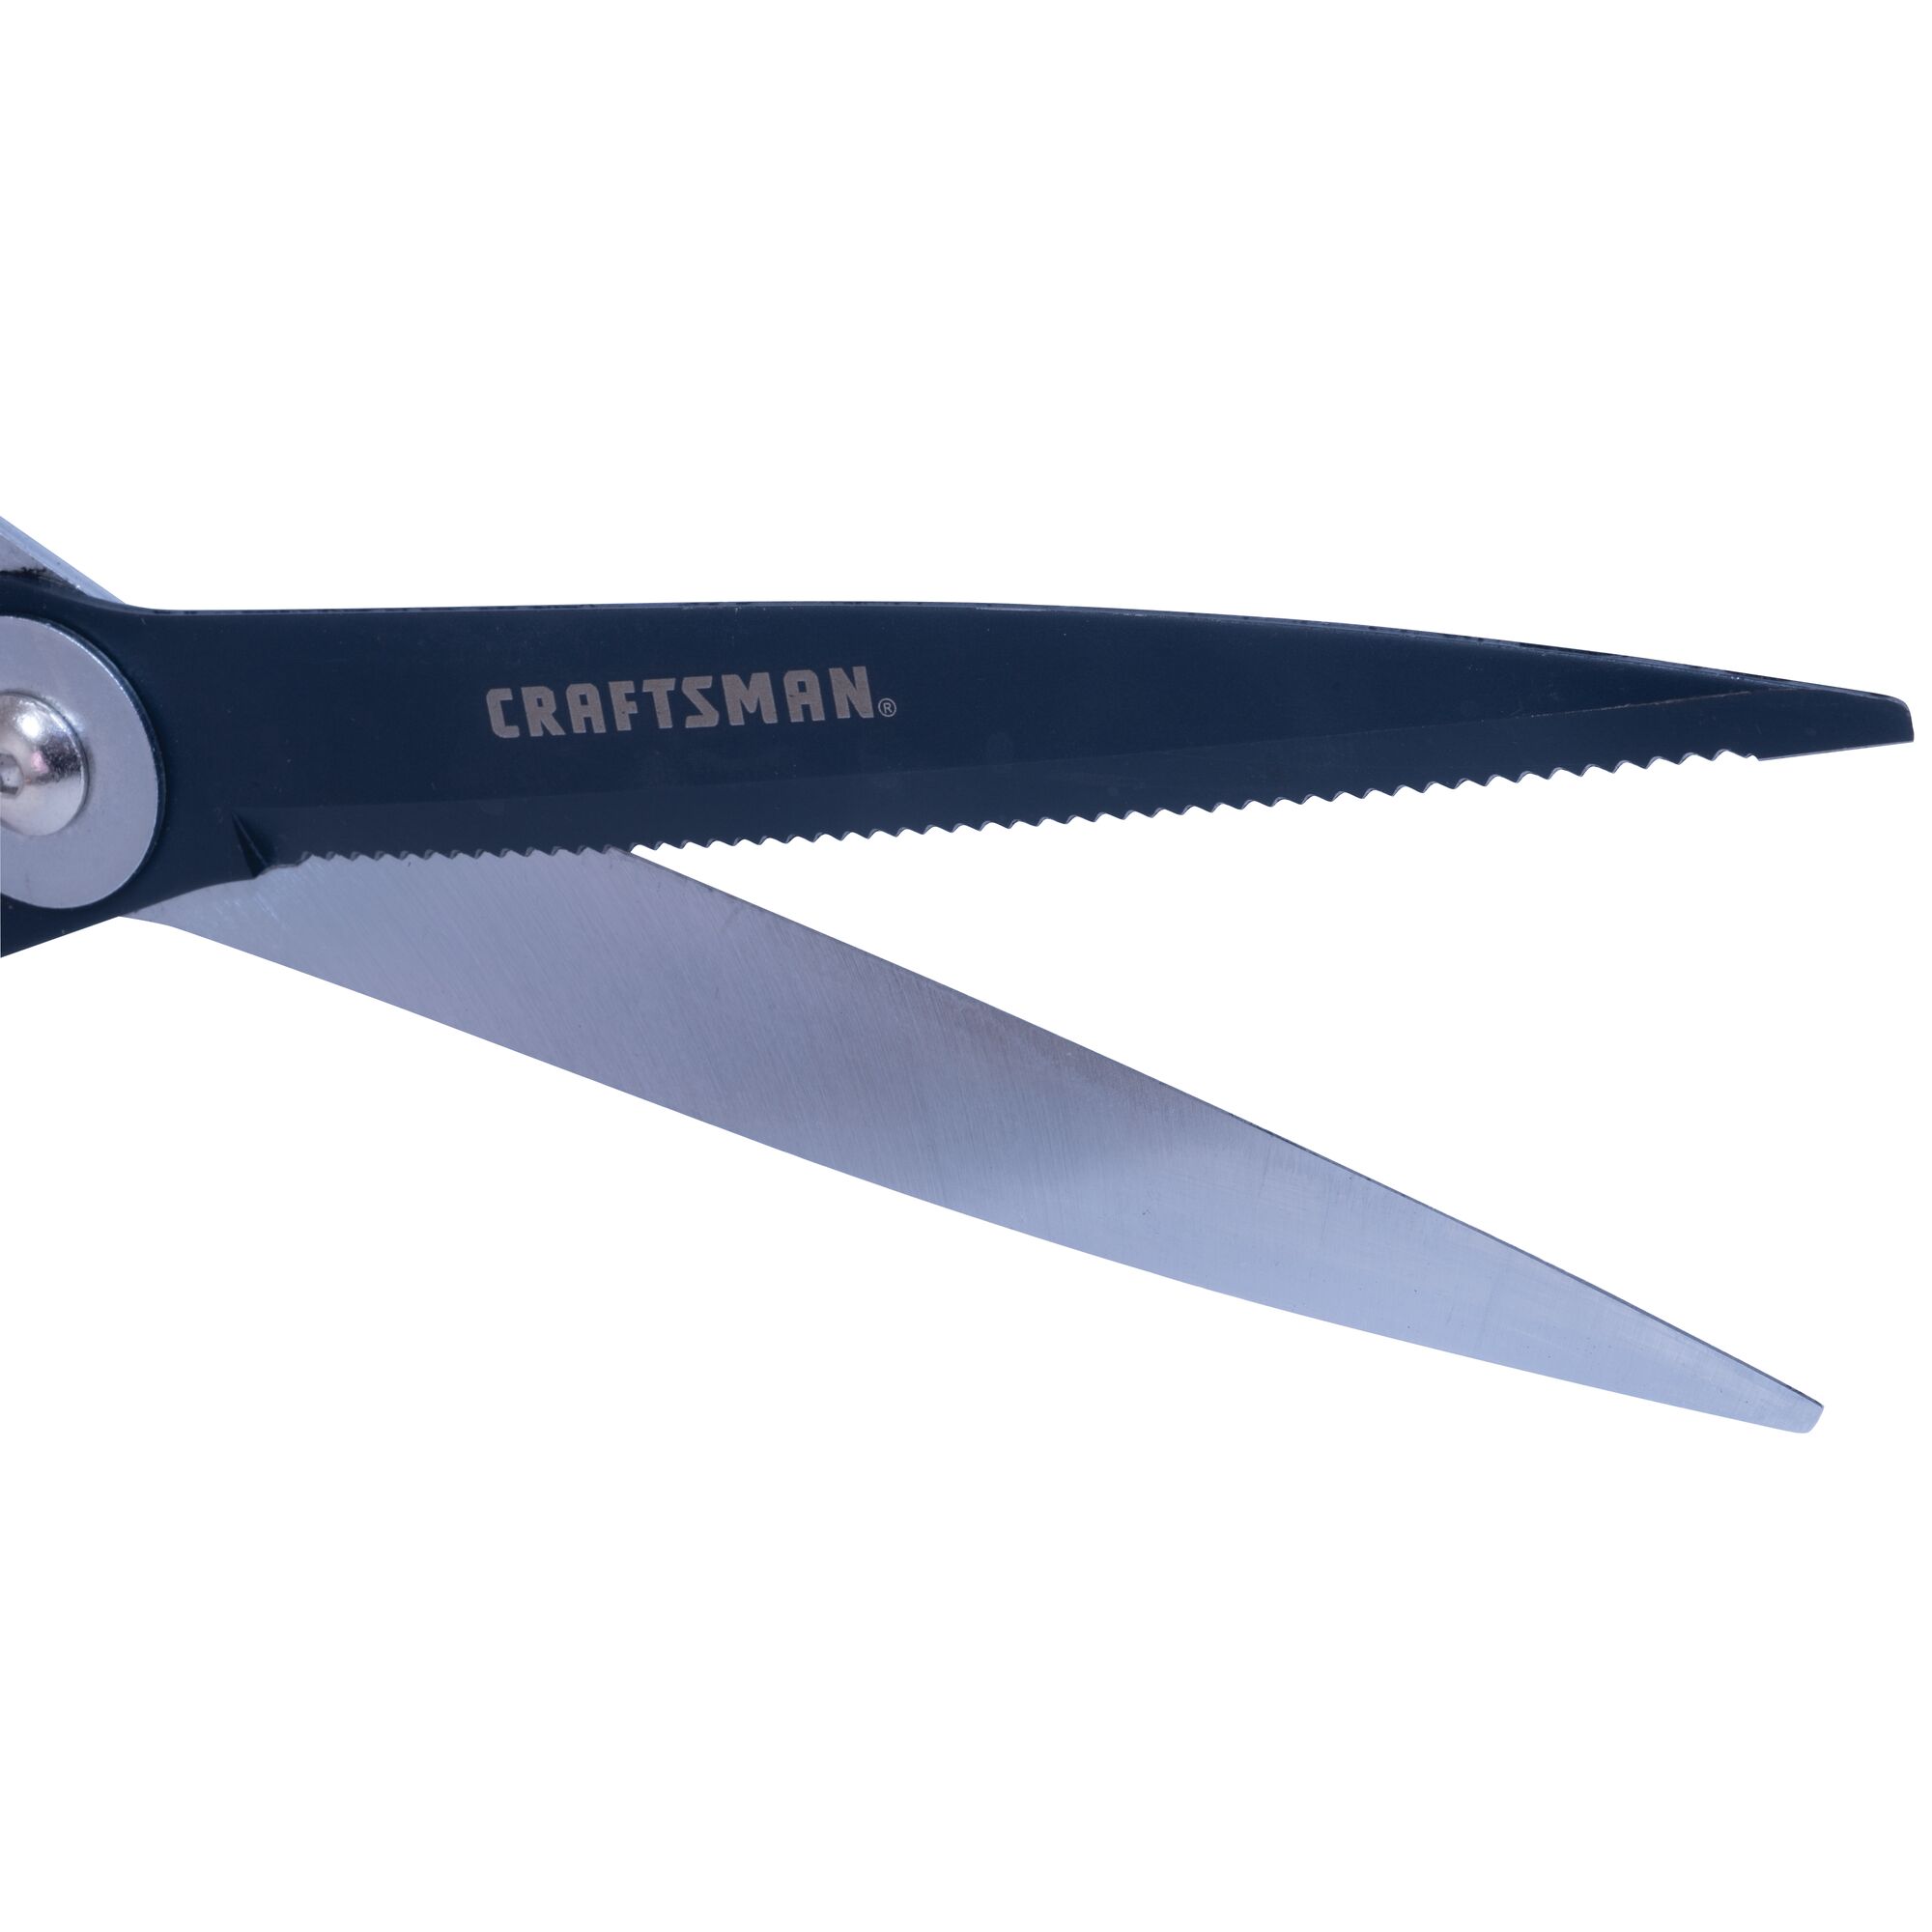 Non-stick blade coating feature of hedge shears with compound action blade and telescoping handles.